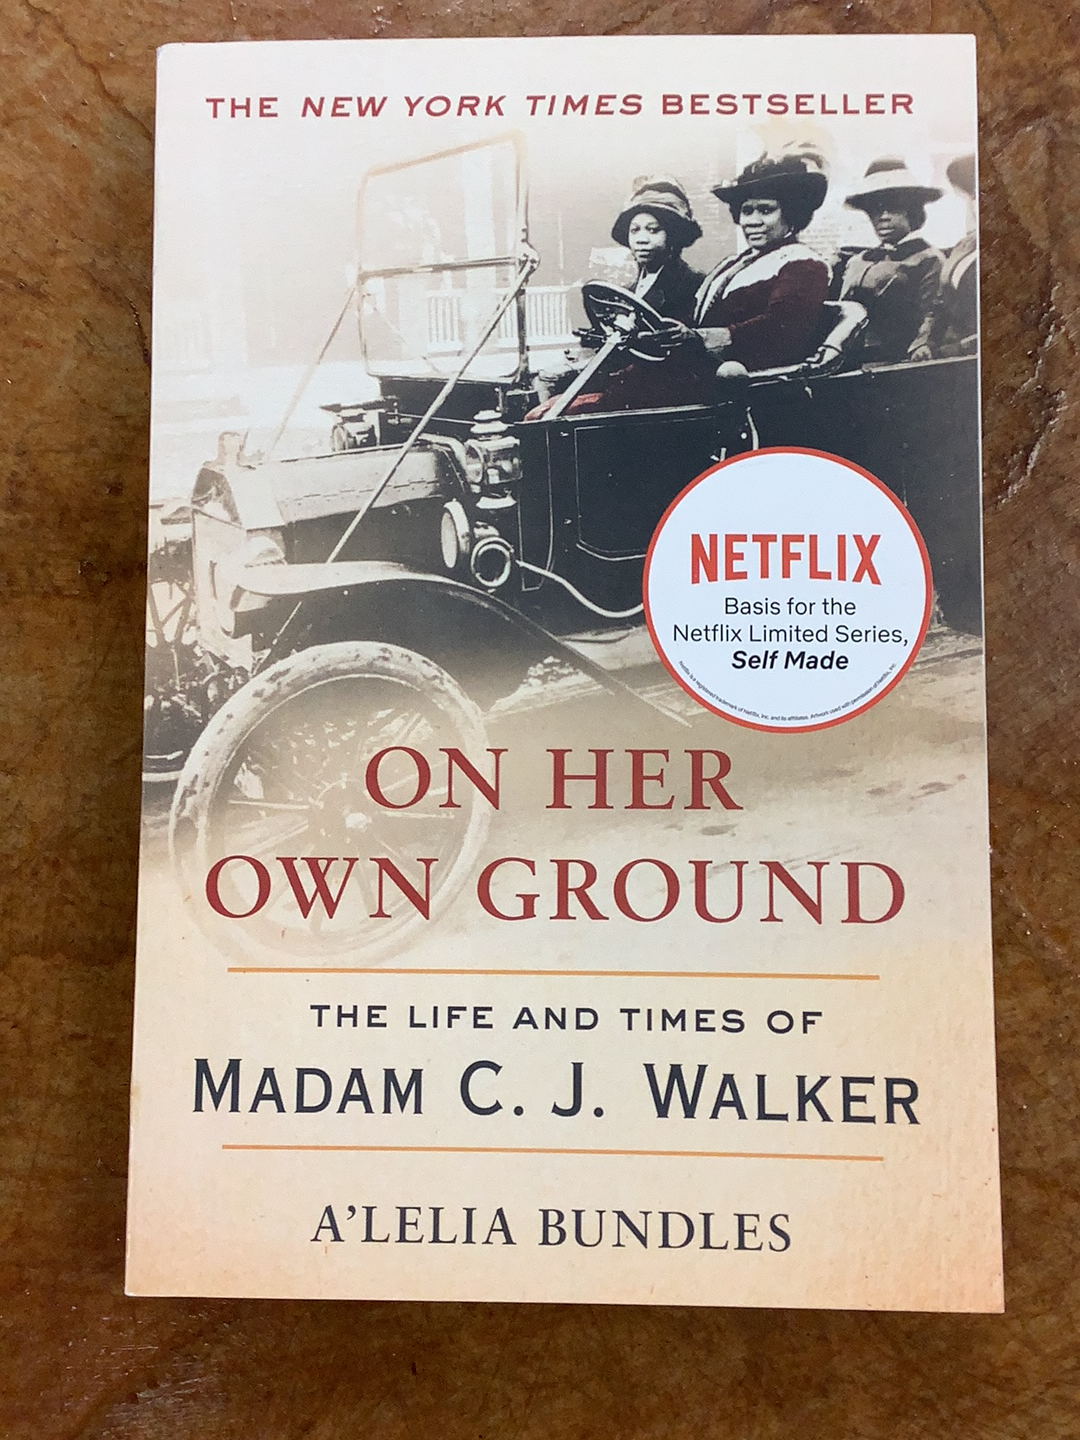 On Her Own Ground: The Life and Times of Madam C. J. walker(Paperback)